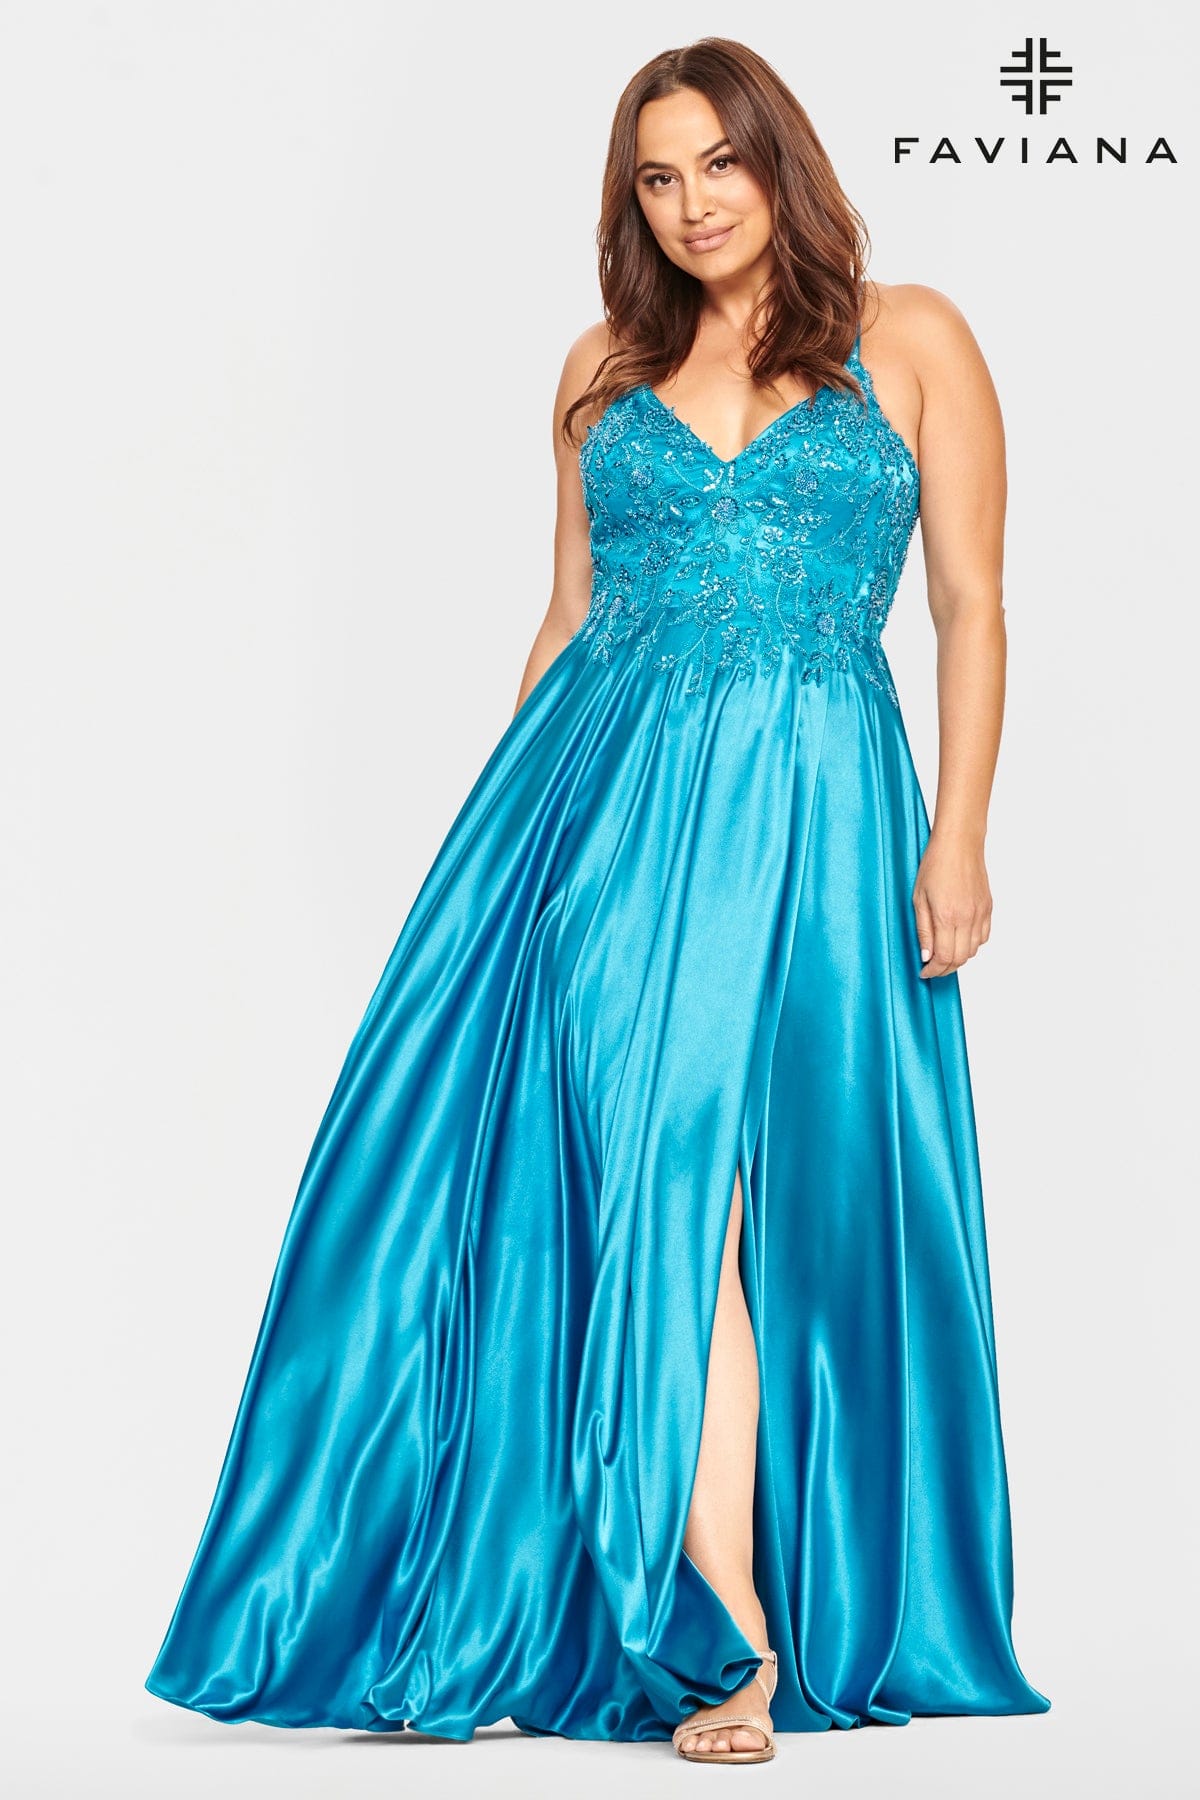 Teal Plus Size V Neck Prom Dress With Flowy Skirt And Beaded Bodice